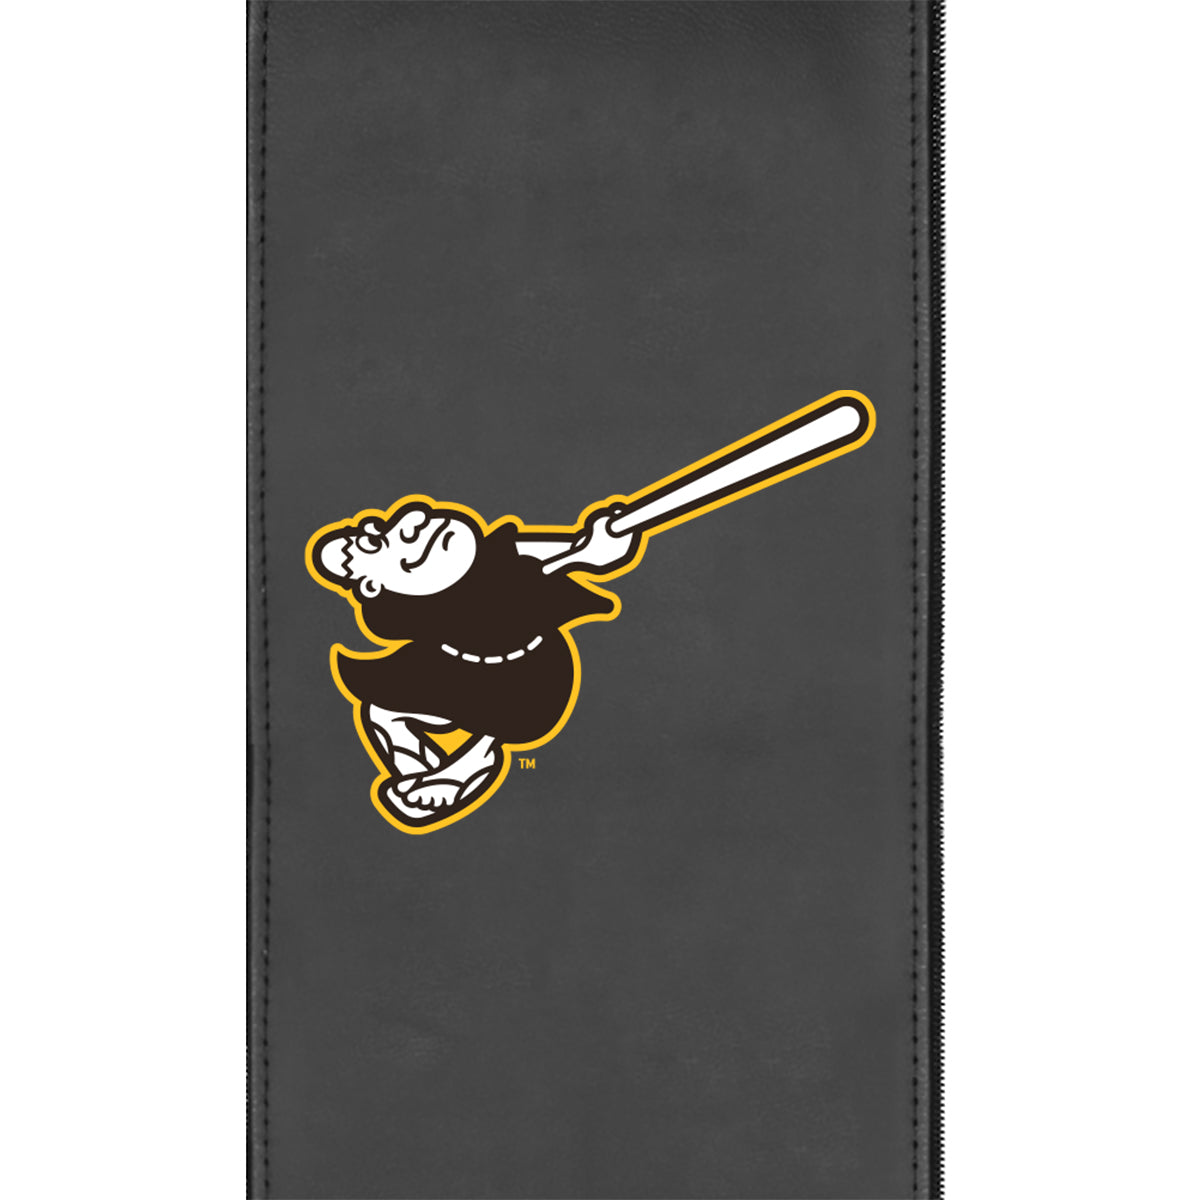 Game Rocker 100 with San Diego Padres Secondary Logo